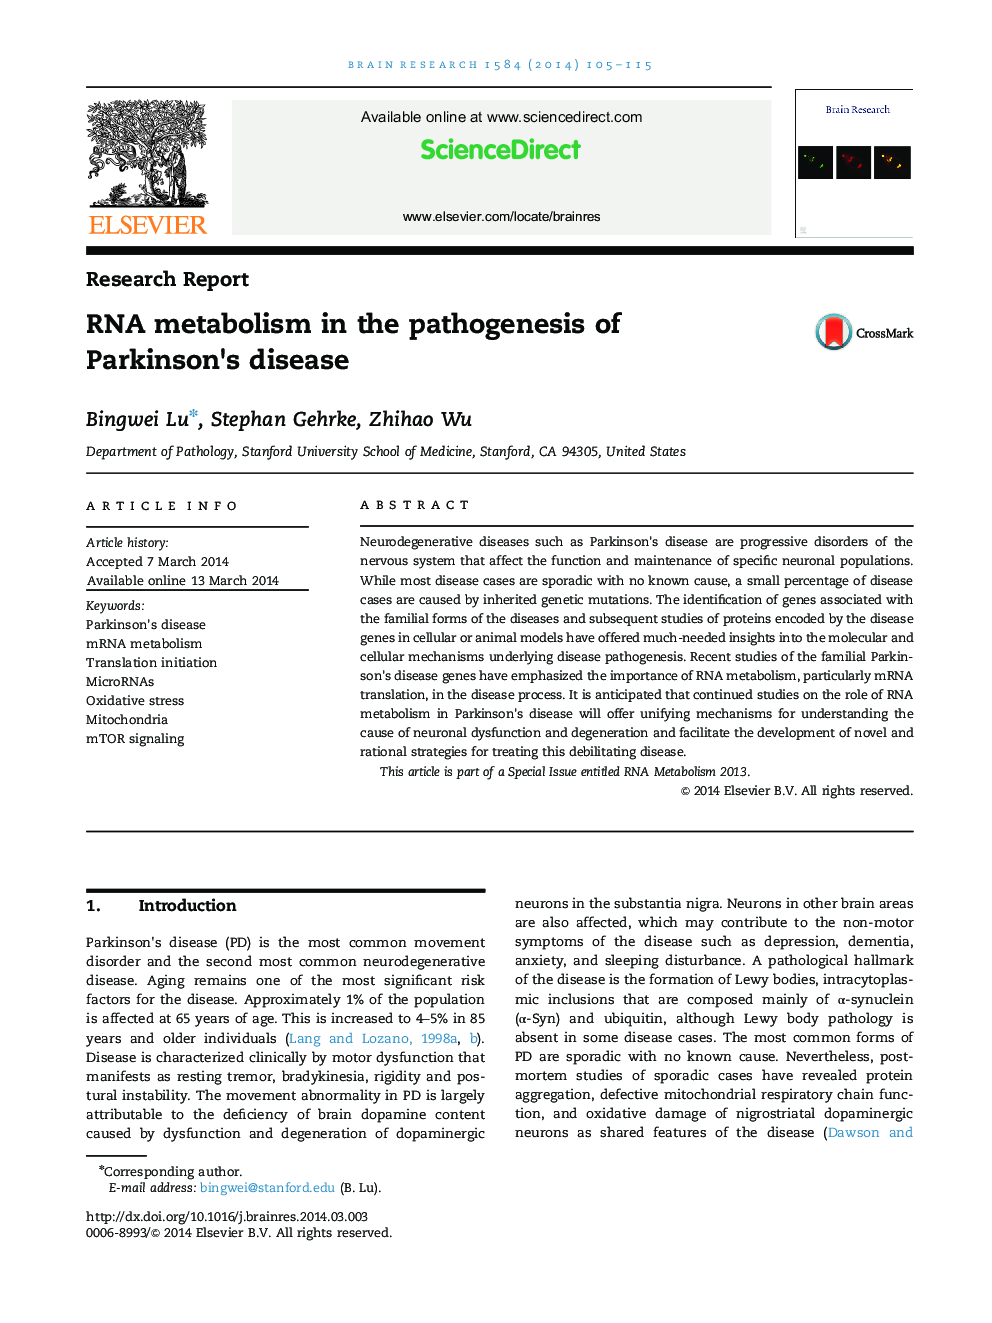 Research ReportRNA metabolism in the pathogenesis of Parkinson×³s disease